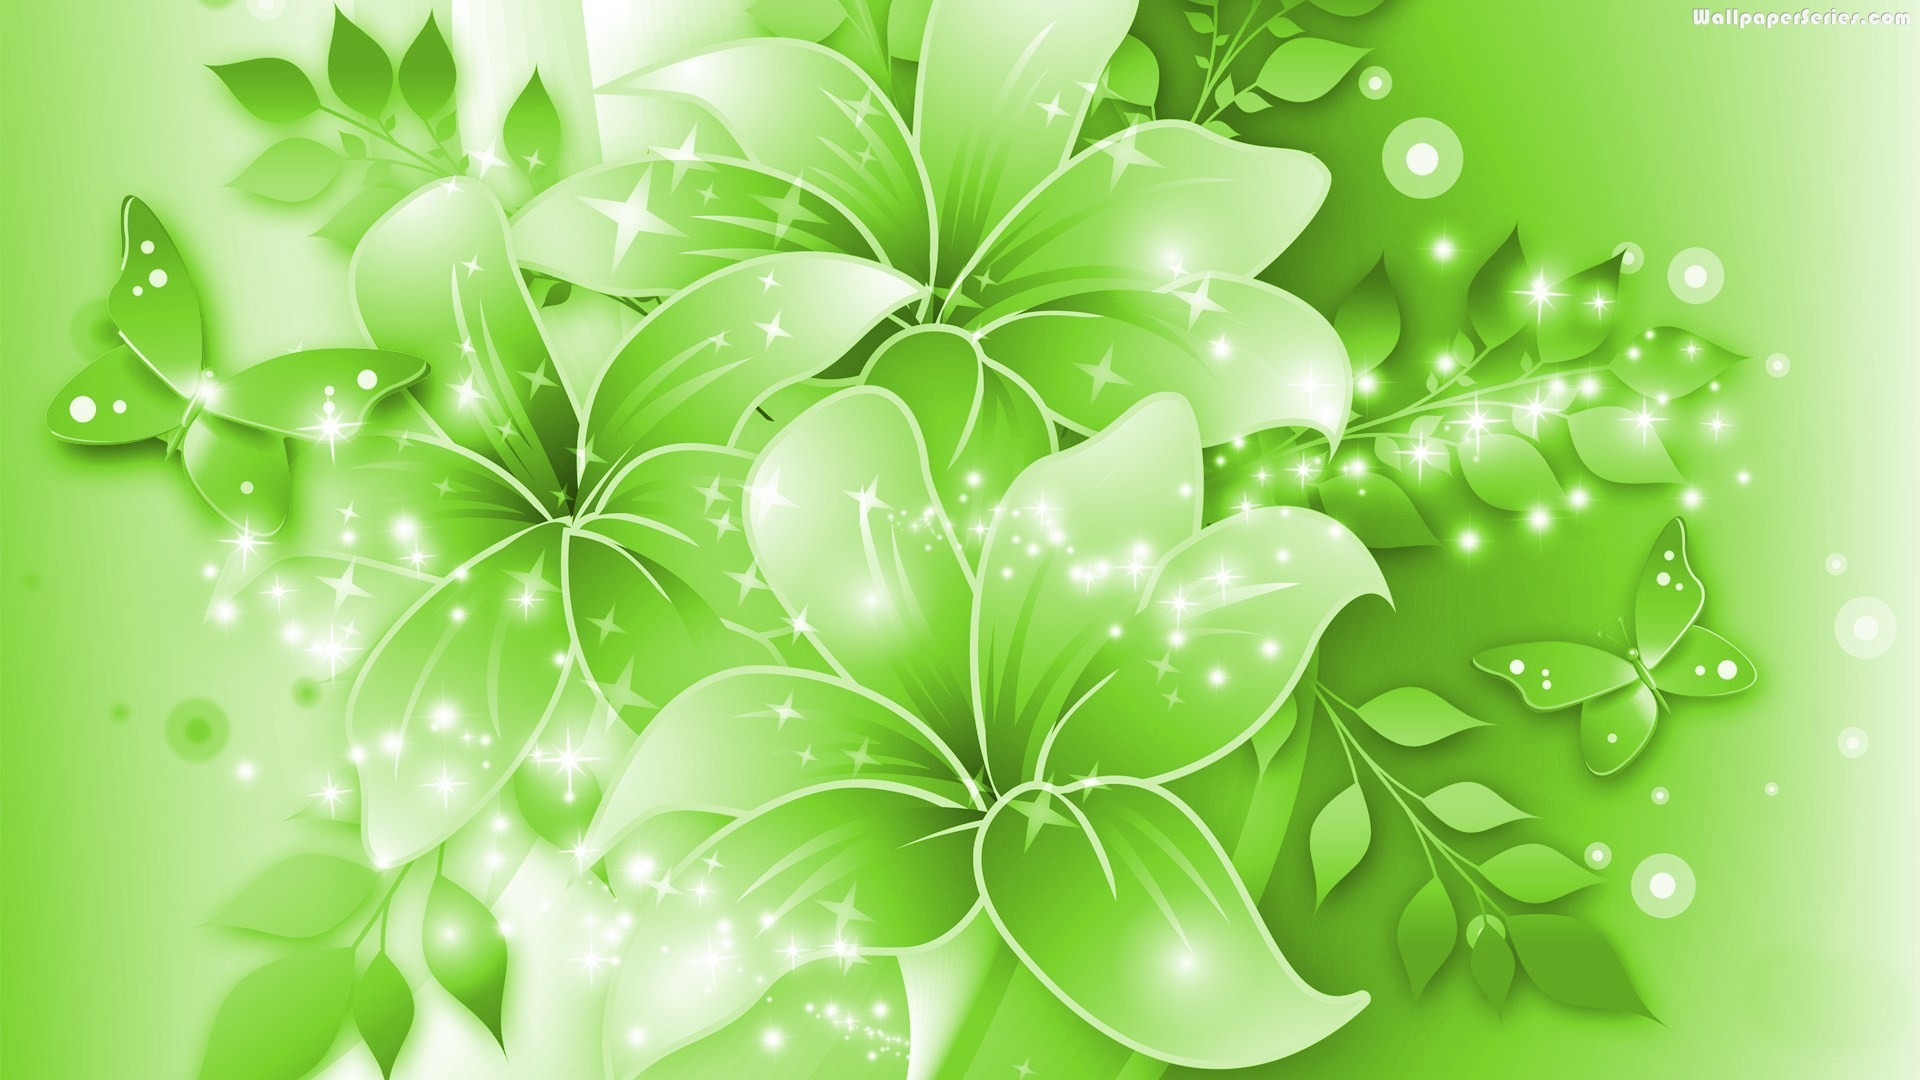 Best Light Green Wallpaper HD with image resolution 1920x1080 pixel. You can make this wallpaper for your Desktop Computer Backgrounds, Mac Wallpapers, Android Lock screen or iPhone Screensavers